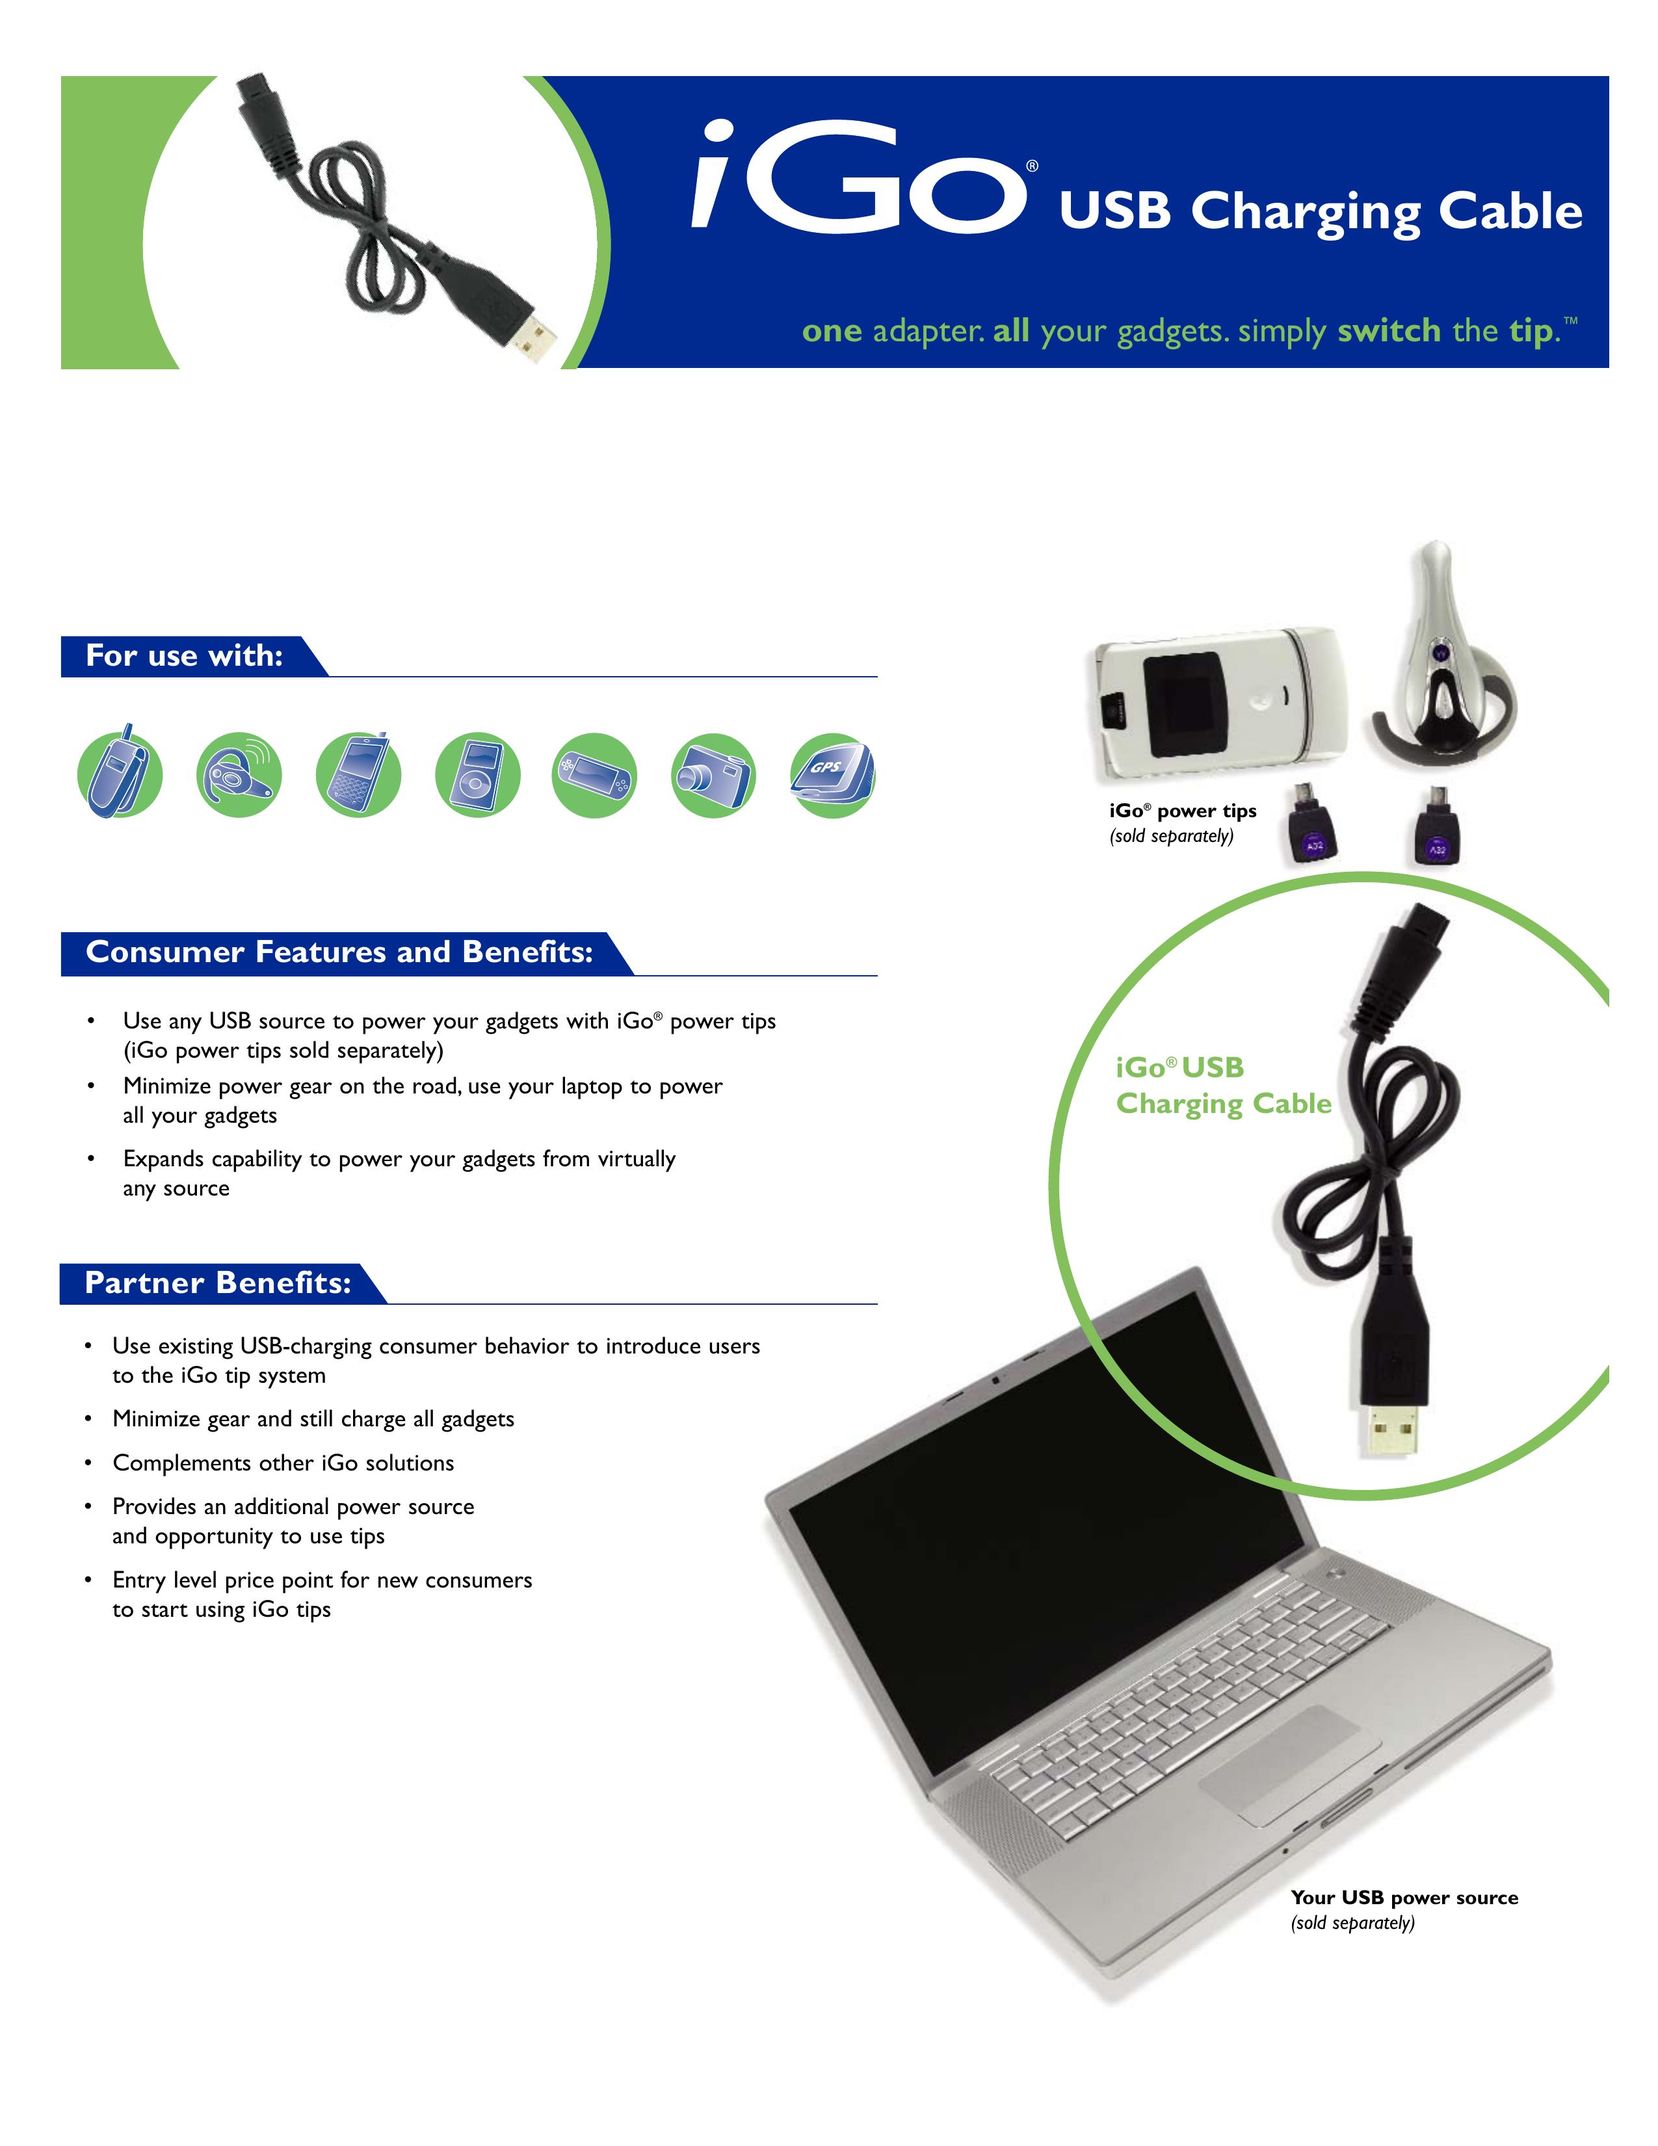 IGo Direct USB Charging Cable TV Cables User Manual